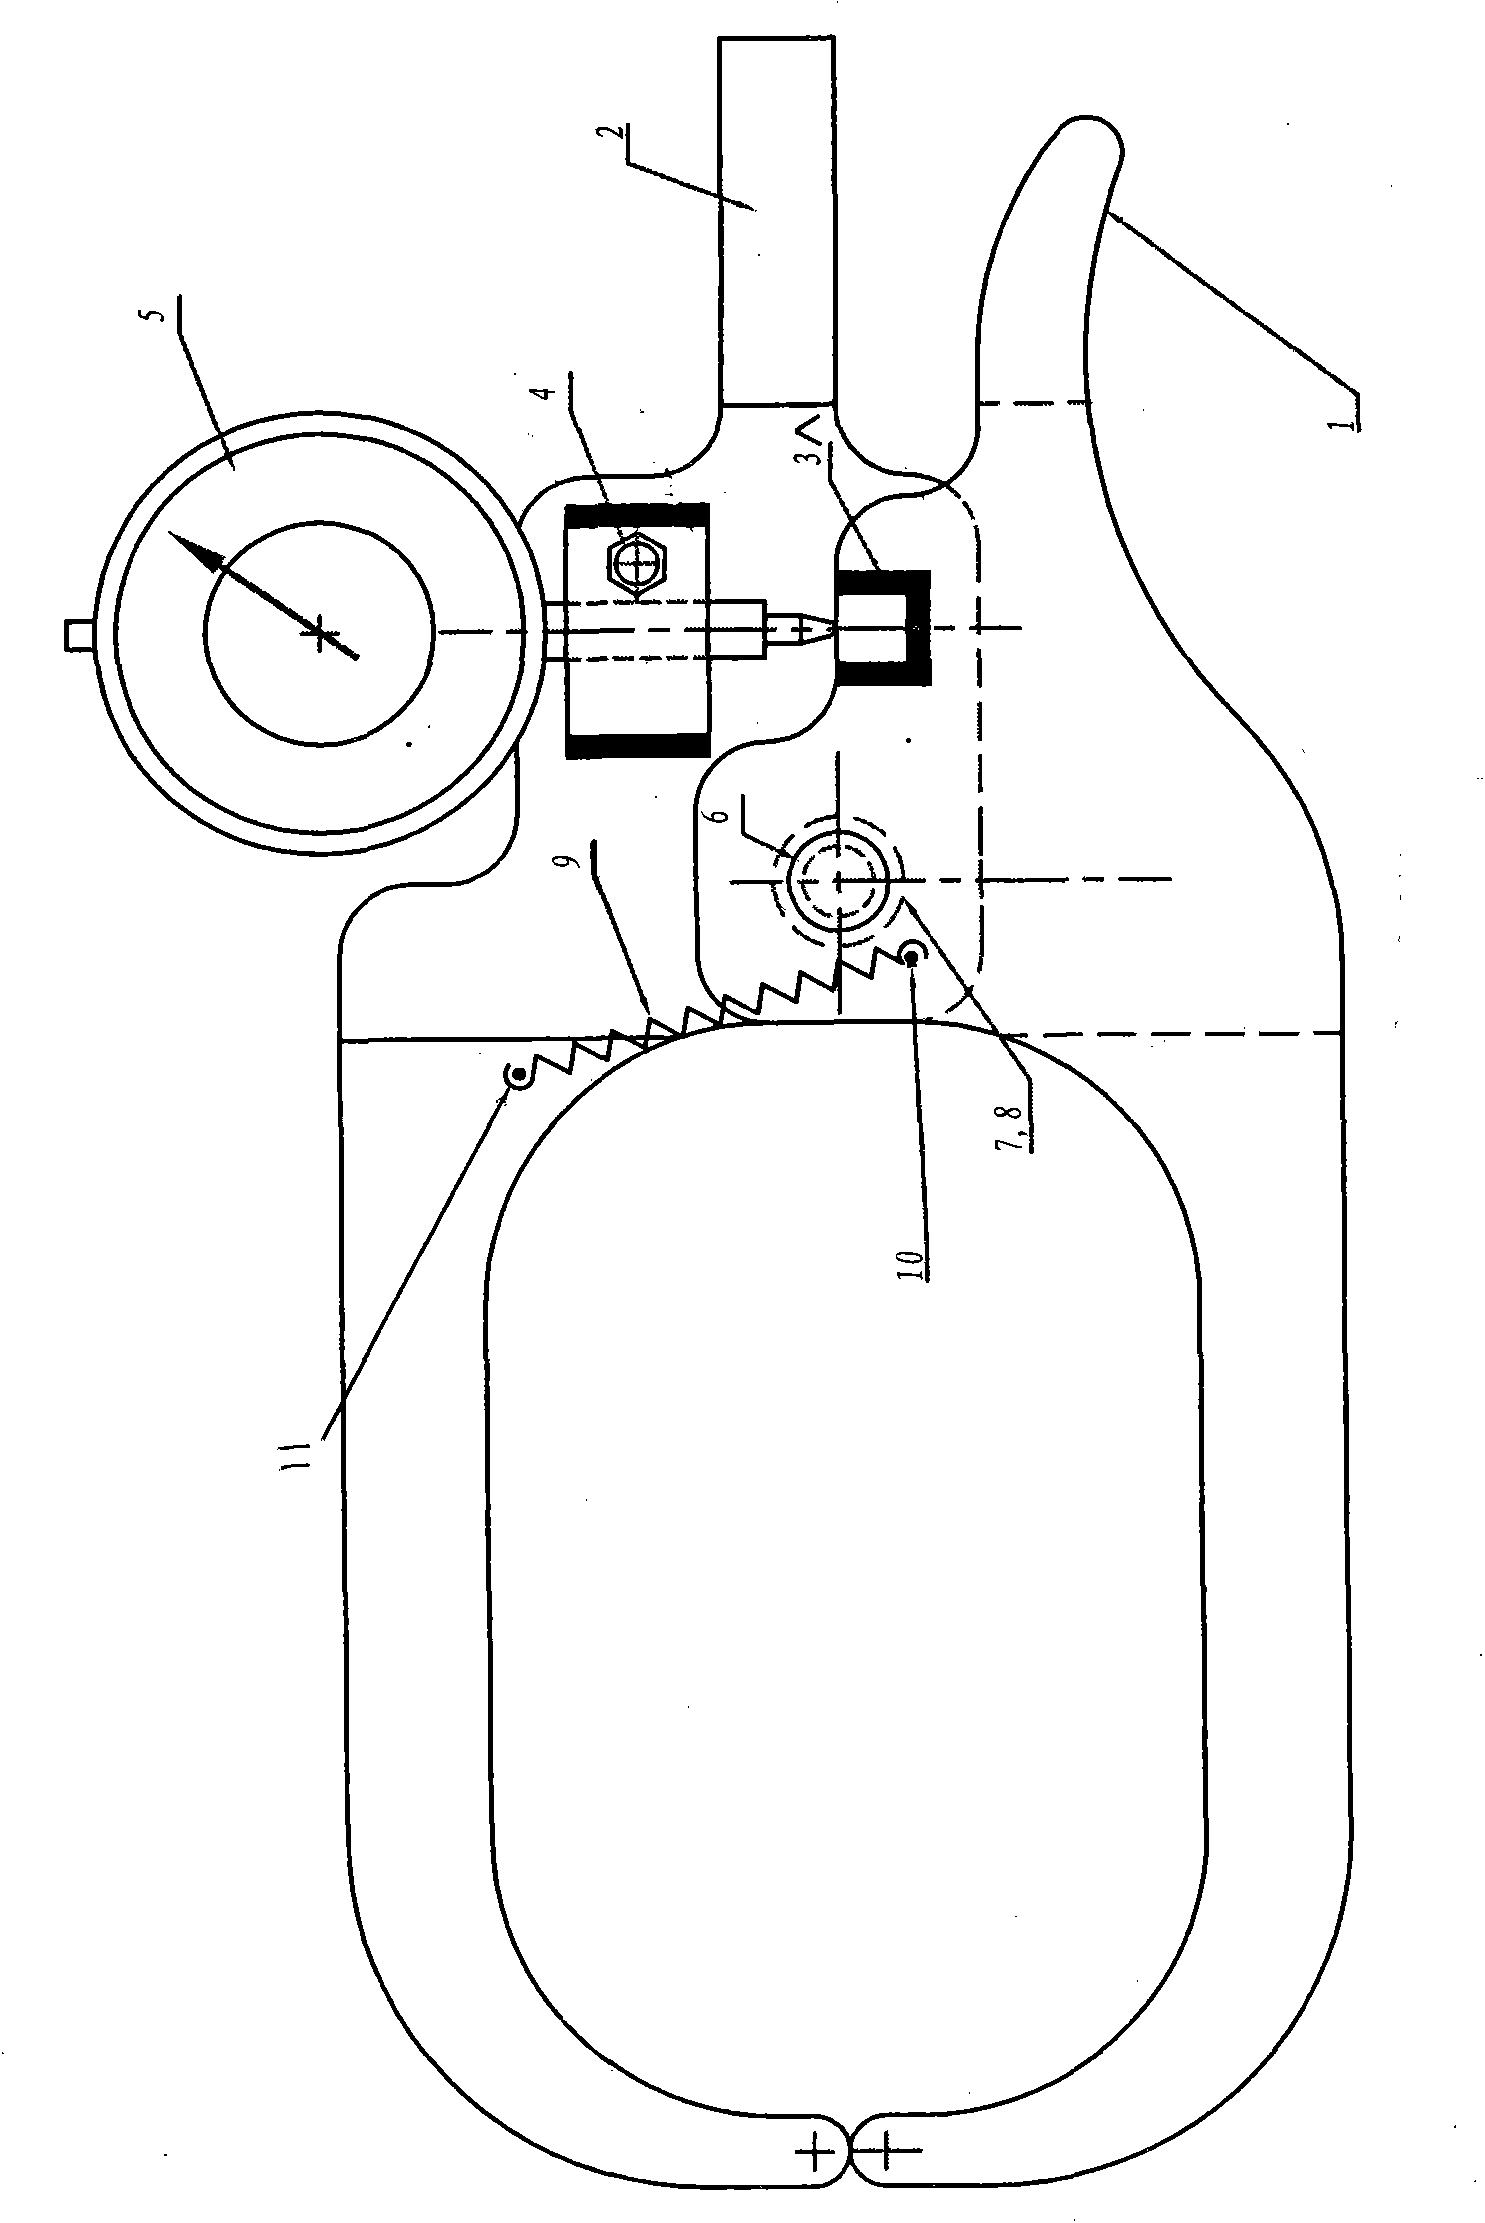 Wall thickness calipers for drum brake and hub